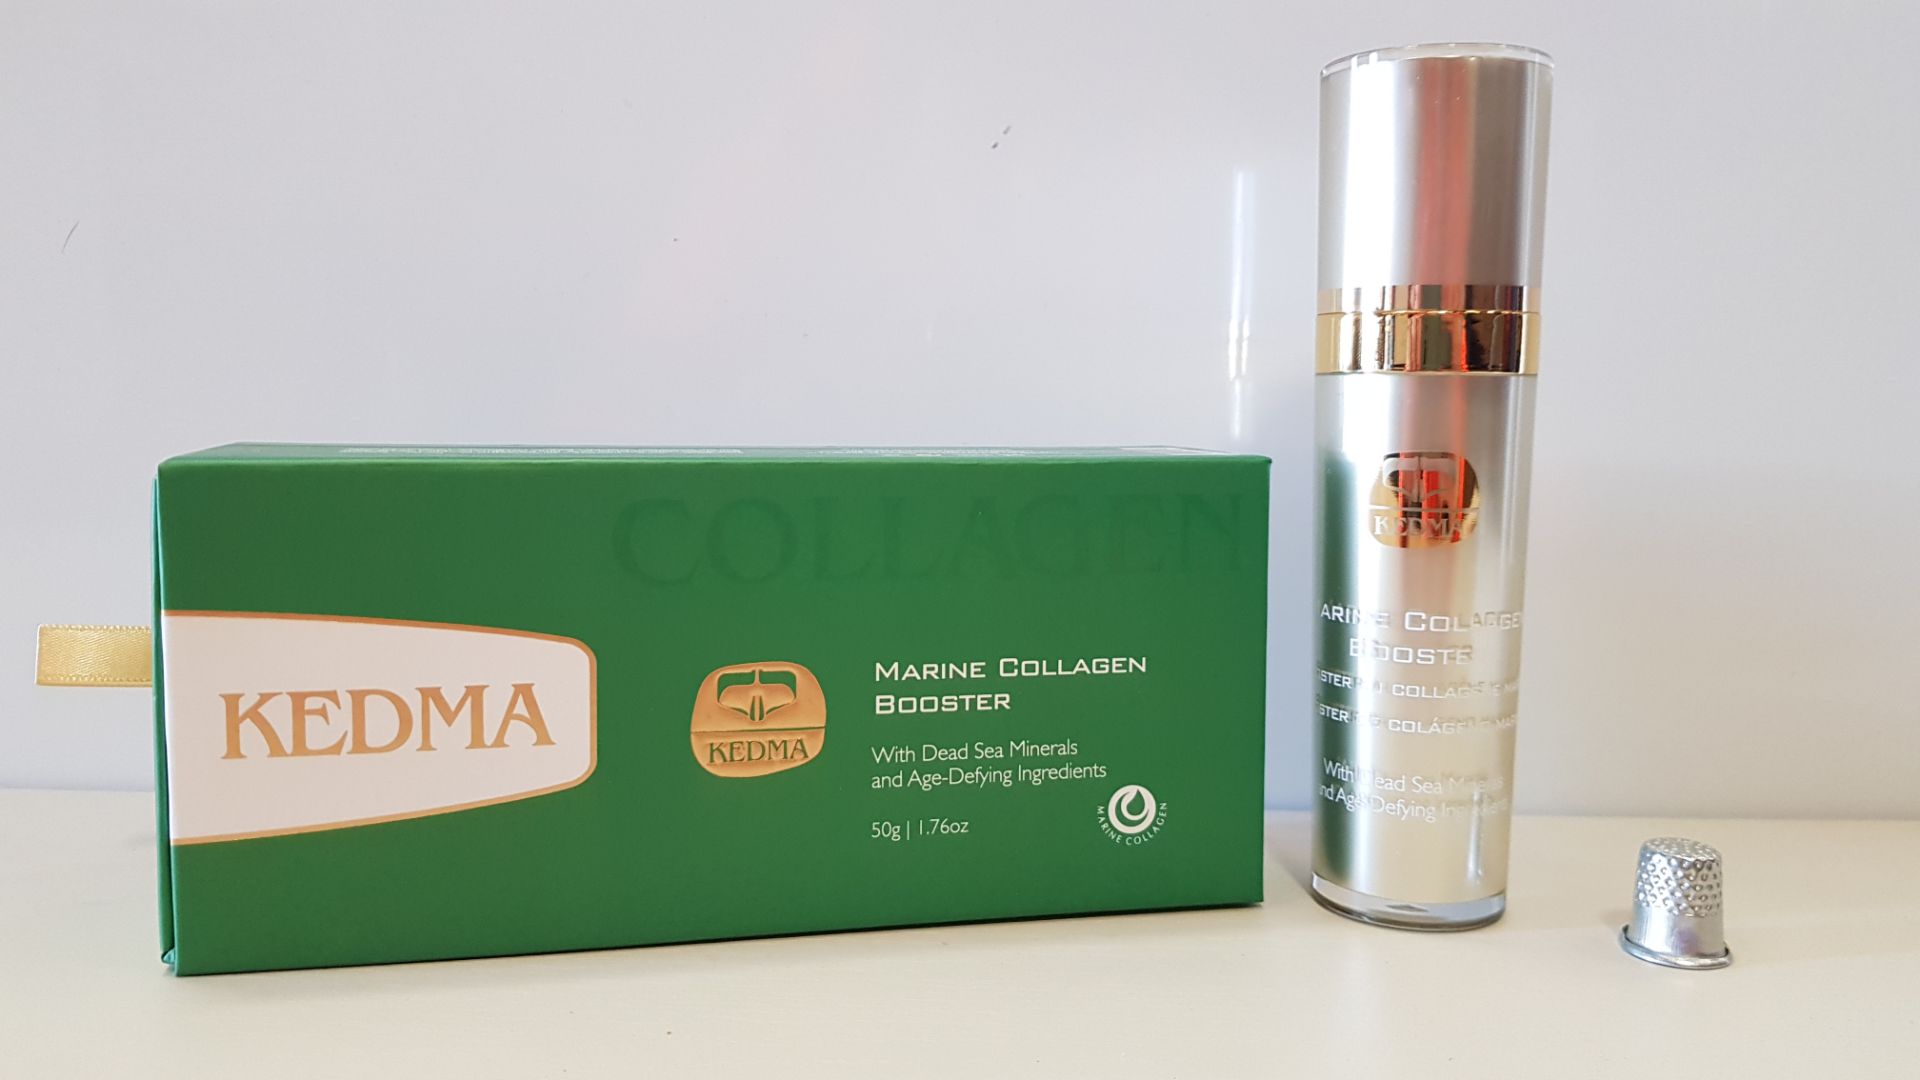 3 X BRAND NEW BOXED KEDMA MARINE COLLAGEN BOOSTER WITH DEAD SEA MINERALS AND AGE-DEFYING INGREDIENTS